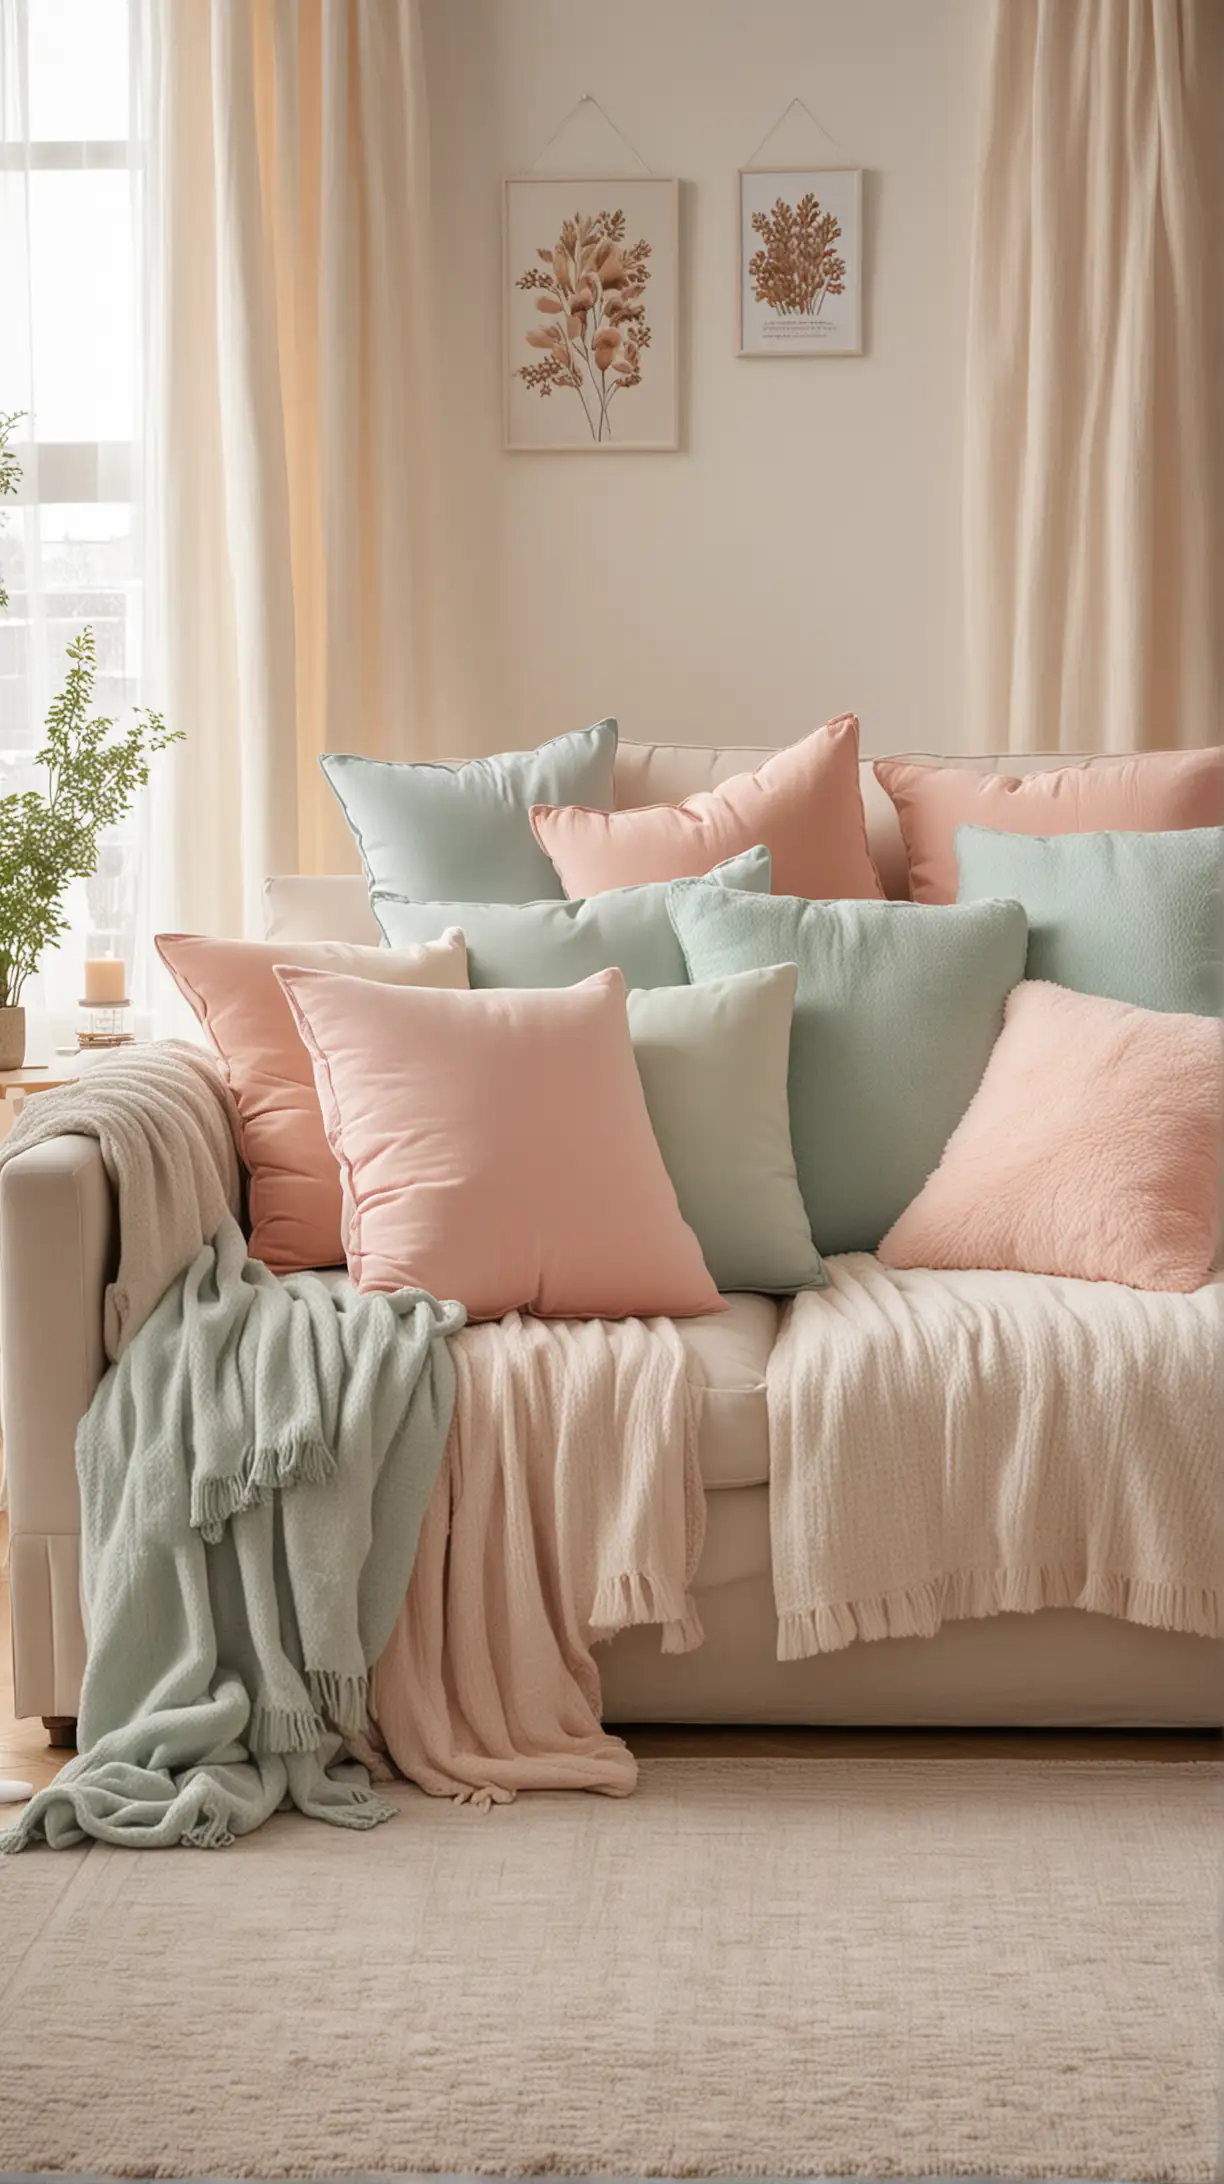 A cozy living room with a mix of soft pastel pillows on a plush sofa, surrounded by light curtains and soothing decor.